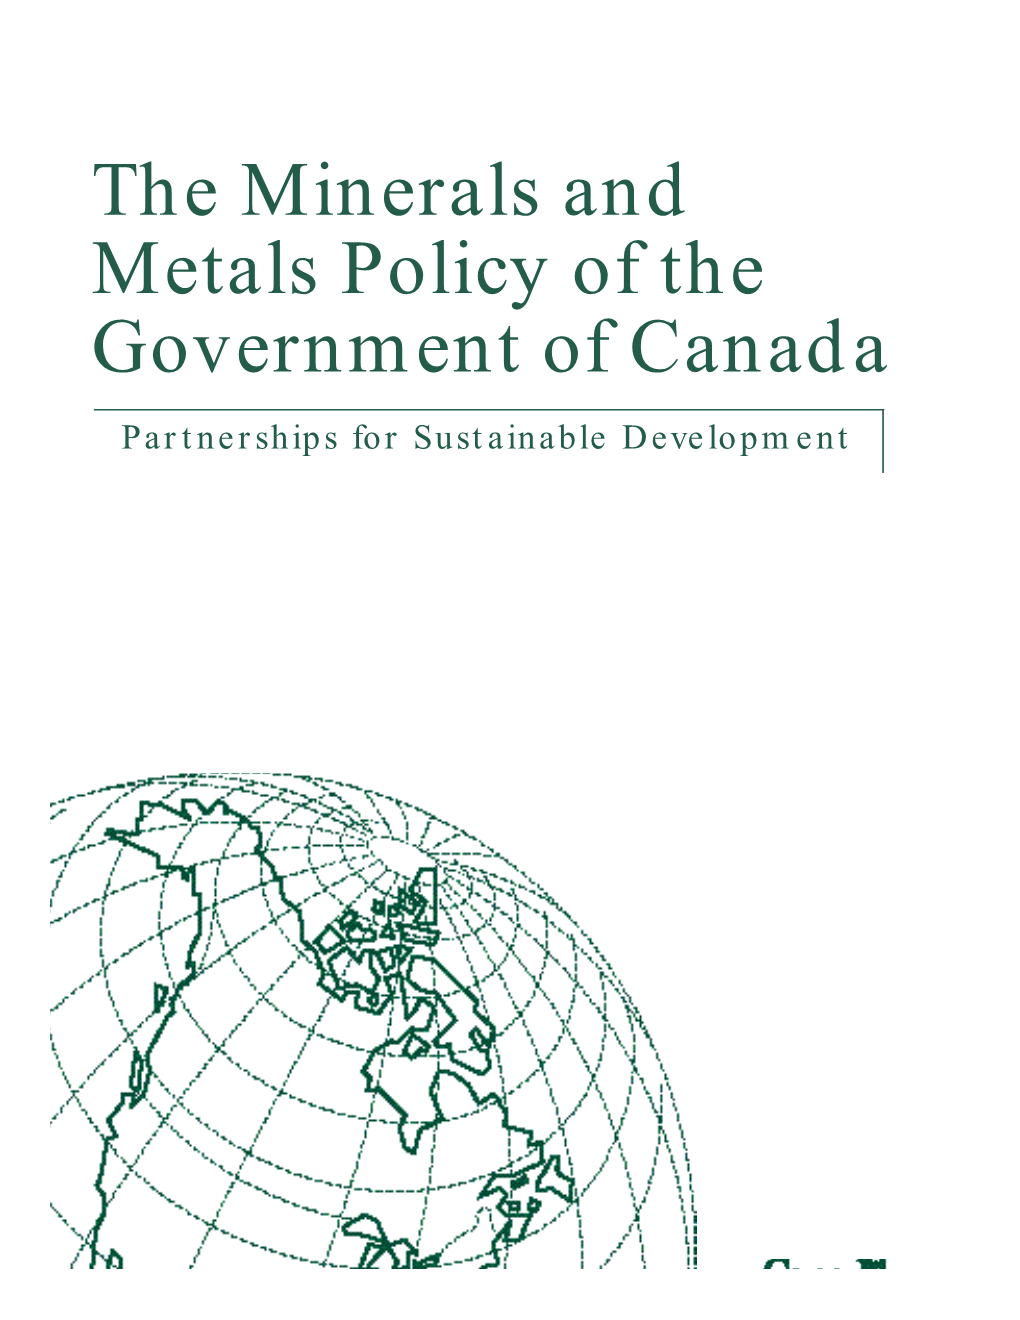 The Minerals and Metals Policy of the Government of Canada © Minister of Public Works and Government Services Canada 1996